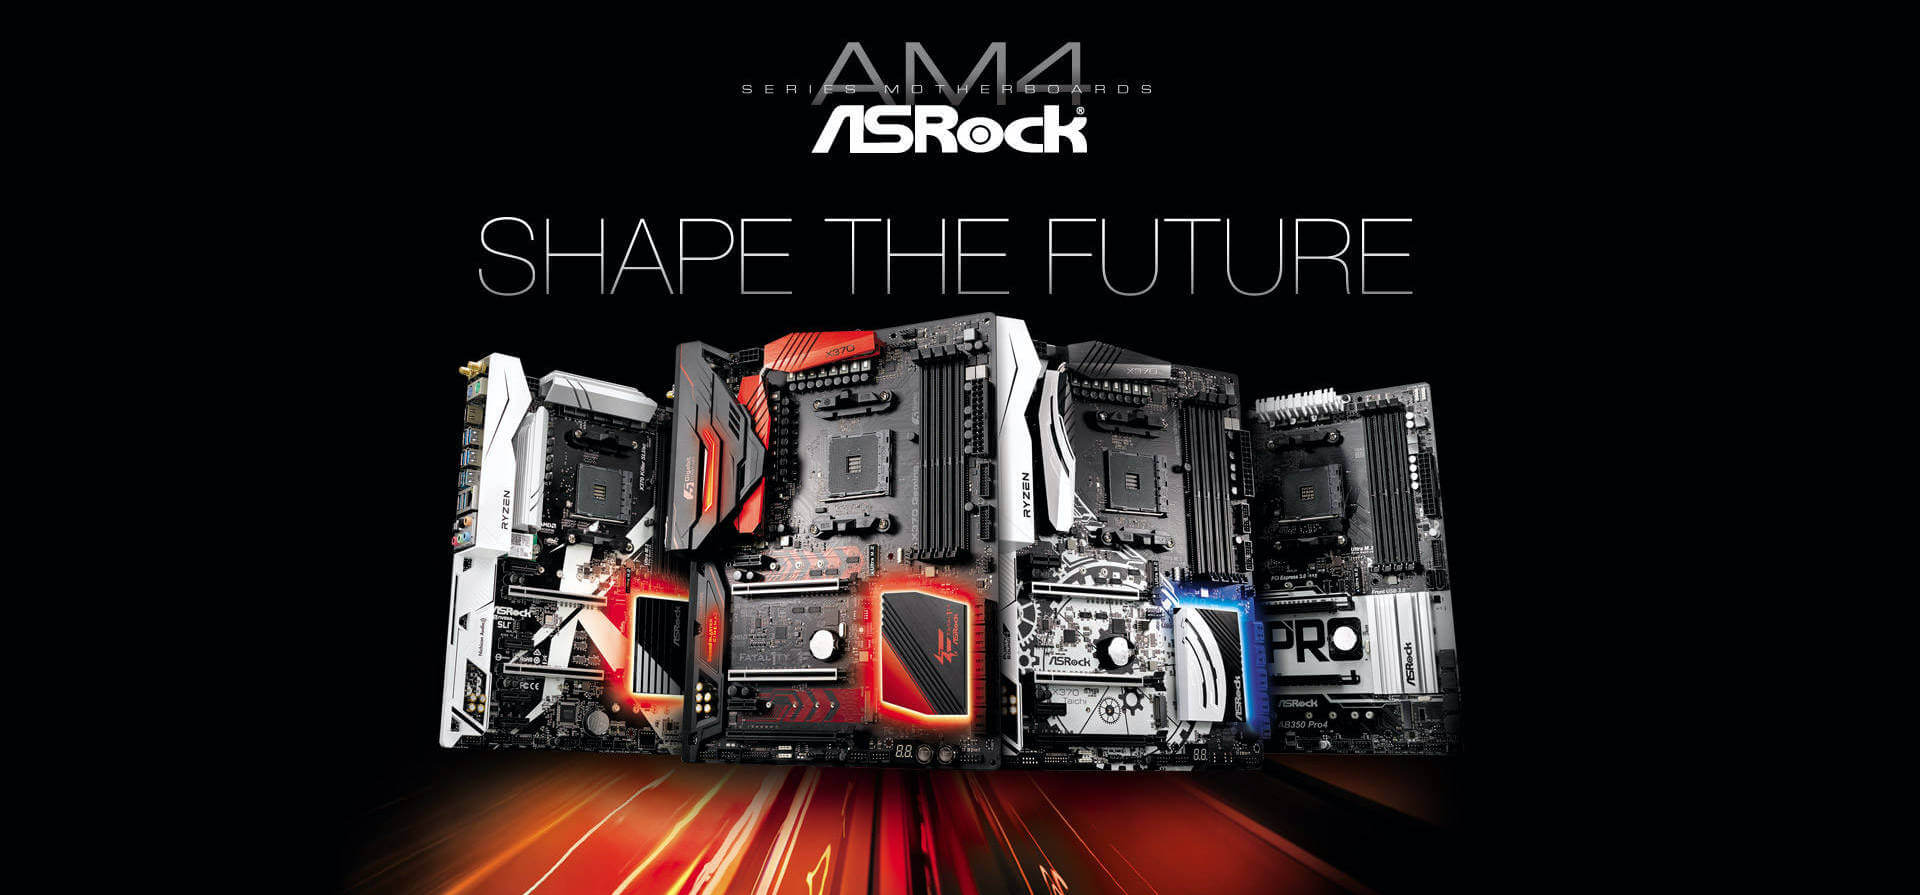 Asrock wants to ride the AMD wave in 2020 like it did last year